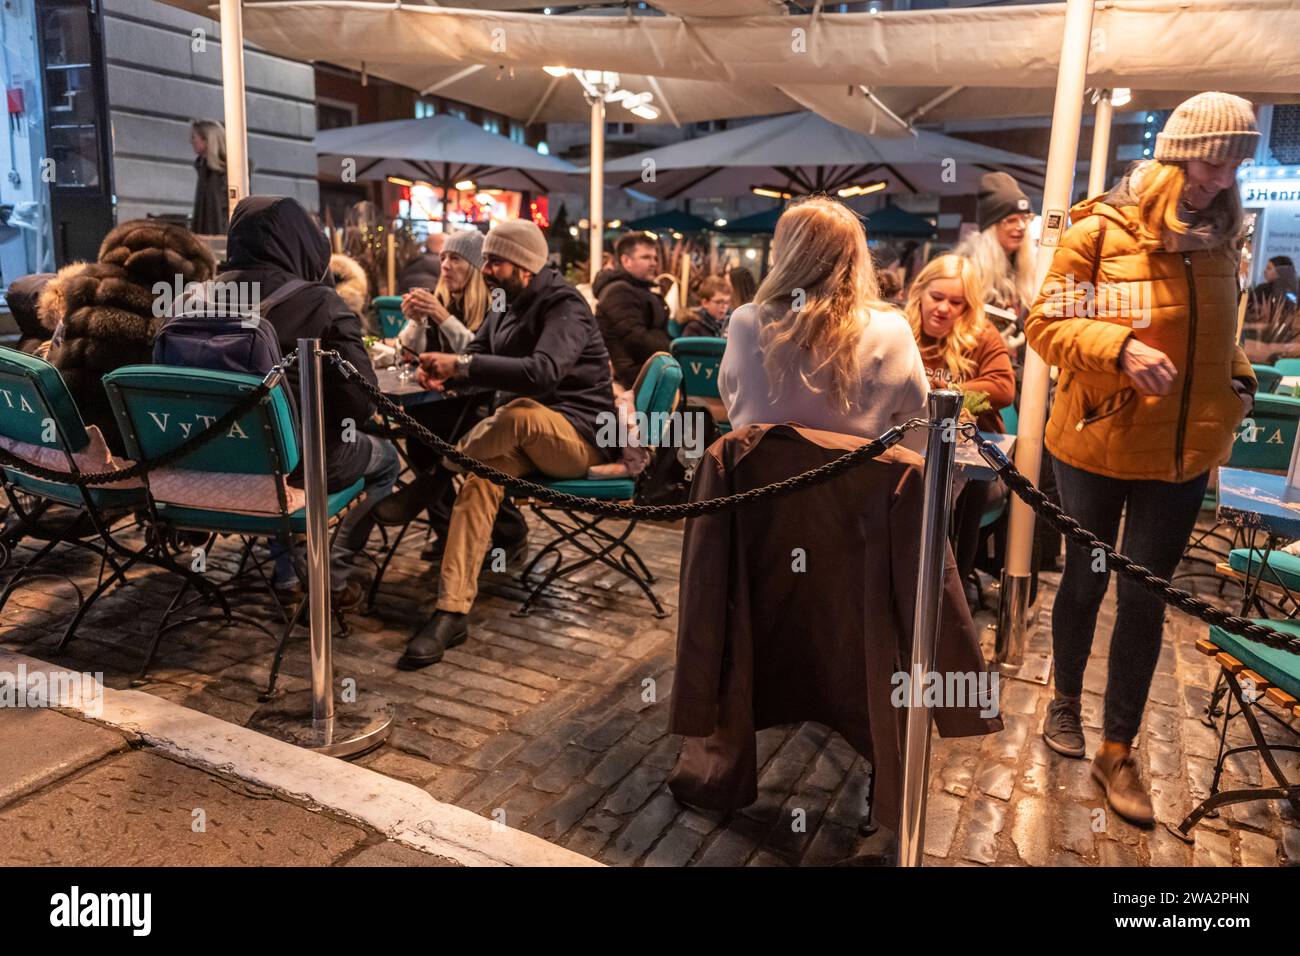 People enjoy evening meals at an outdoor restaraunt in central London UK Stock Photo